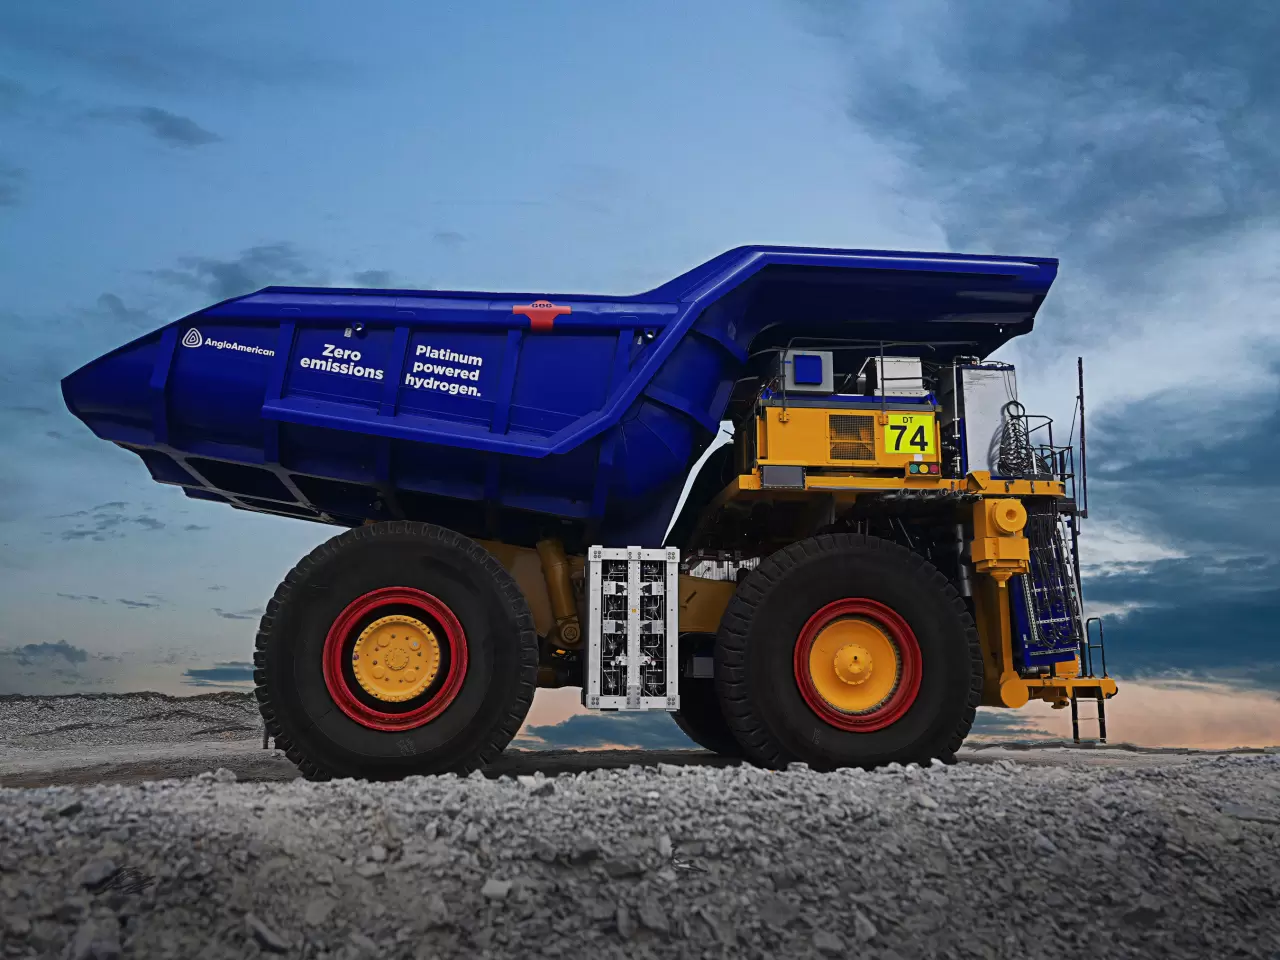 The proof-of-concept hydrogen powered ultra-class mine haul truck at Anglo American’s Mogalakwena Platinum Group Metals mine in South Africa. Image courtesy of Anglo American. img#1